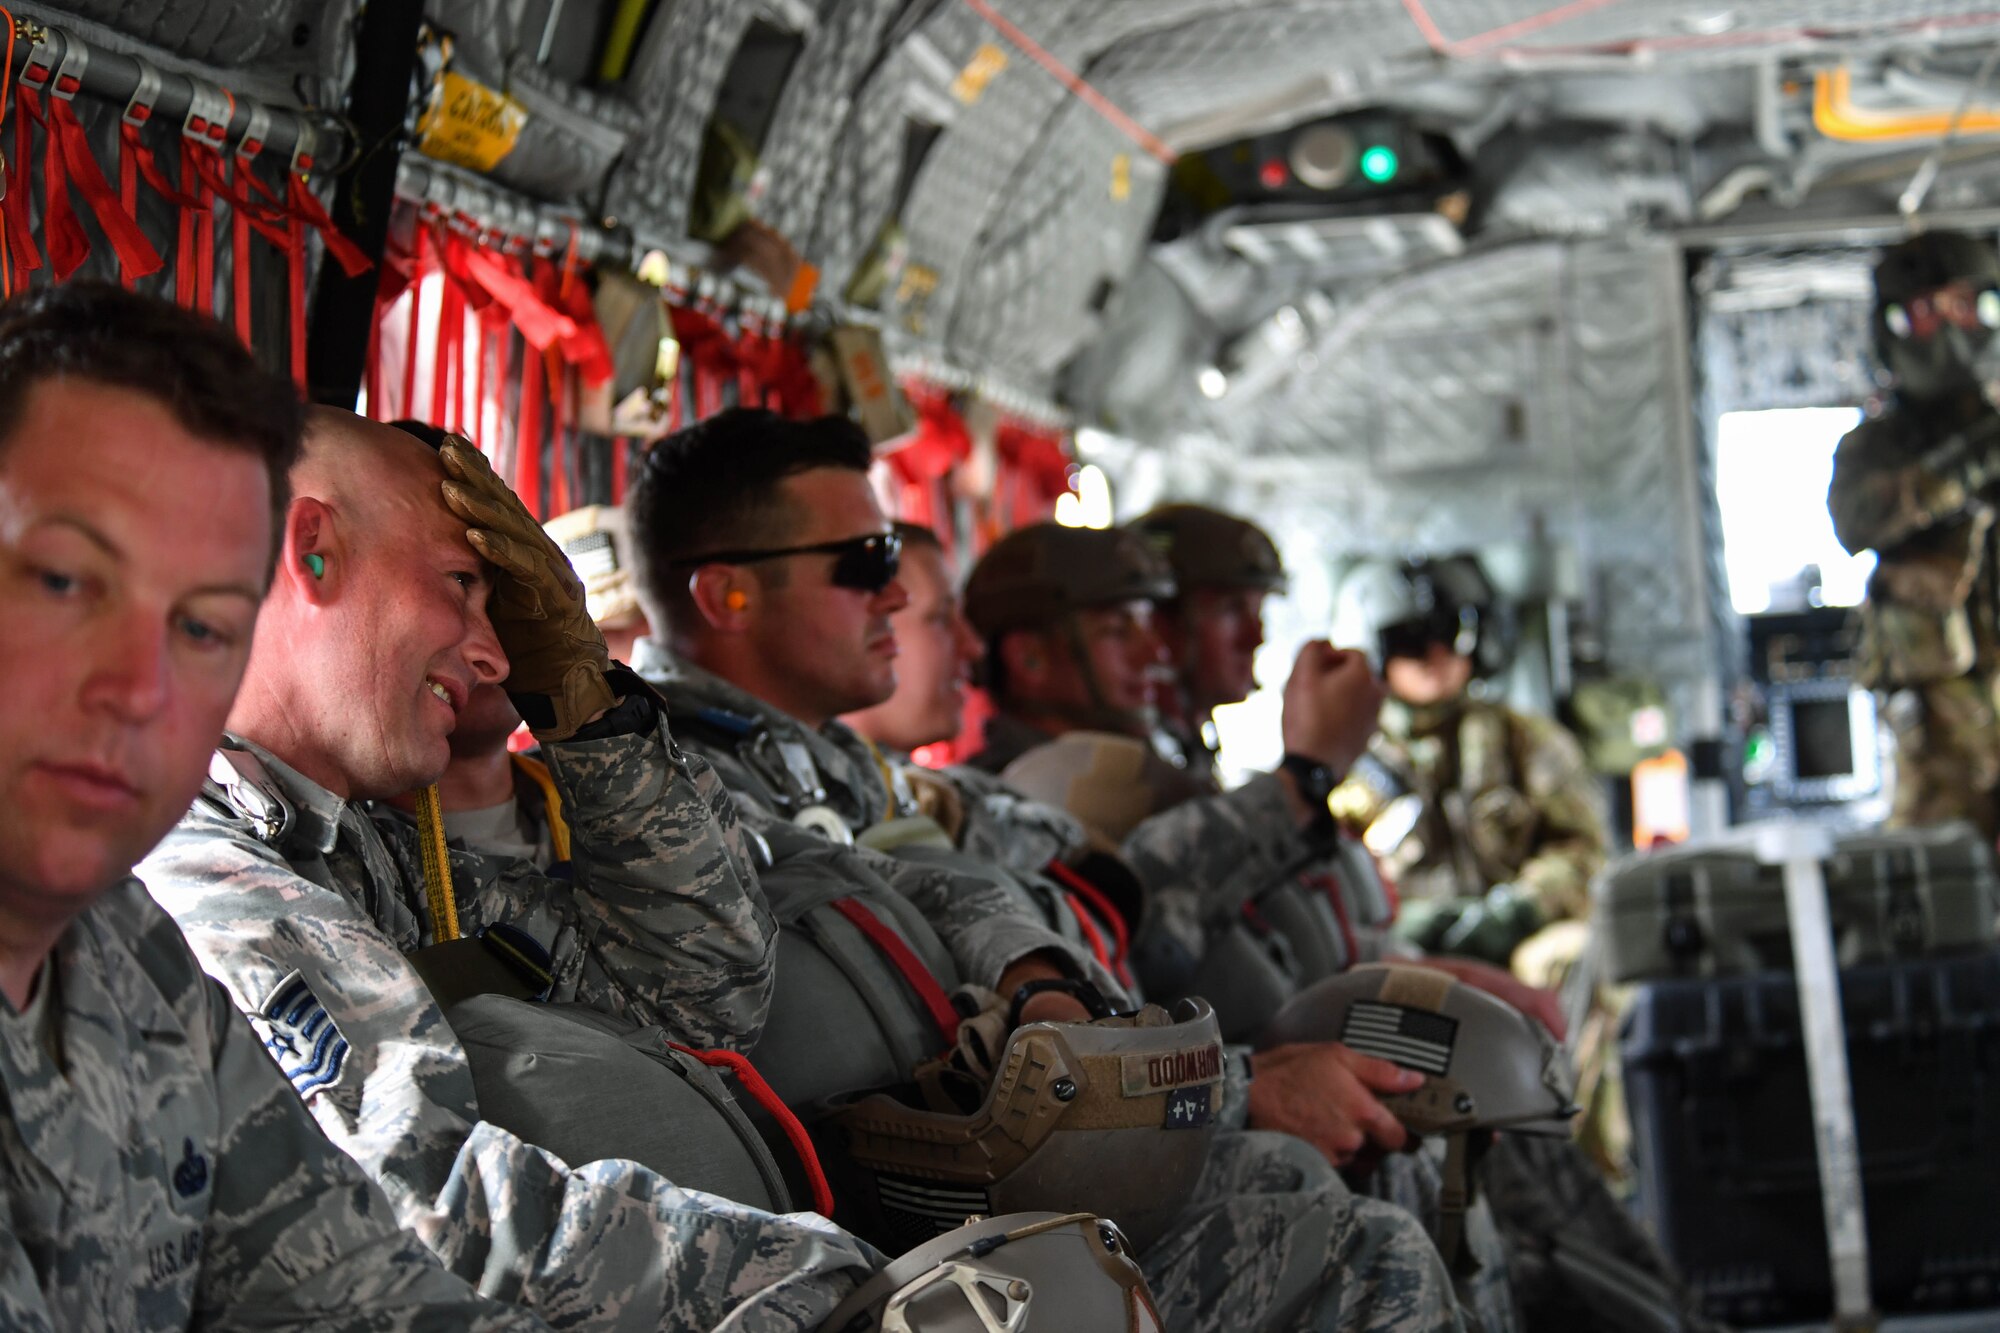 U.S. Air Force Airmen assigned to the 435th Contingency Response Group sit inside a U.S. Army CH-47 Chinook during exercise Saber Strike 17 at Lielvarde Air Base, Latvia, June 10, 2017. The 435th CRG Airmen parachuted out of the Chinook to prepare them for such operations when deployed. Saber Strike 17 highlights the inherent flexibility of ground and air forces to rapidly respond to crises allowing for the right presence where it is needed, when it is needed. (U.S Air Force photo by Senior Airman Tryphena Mayhugh)